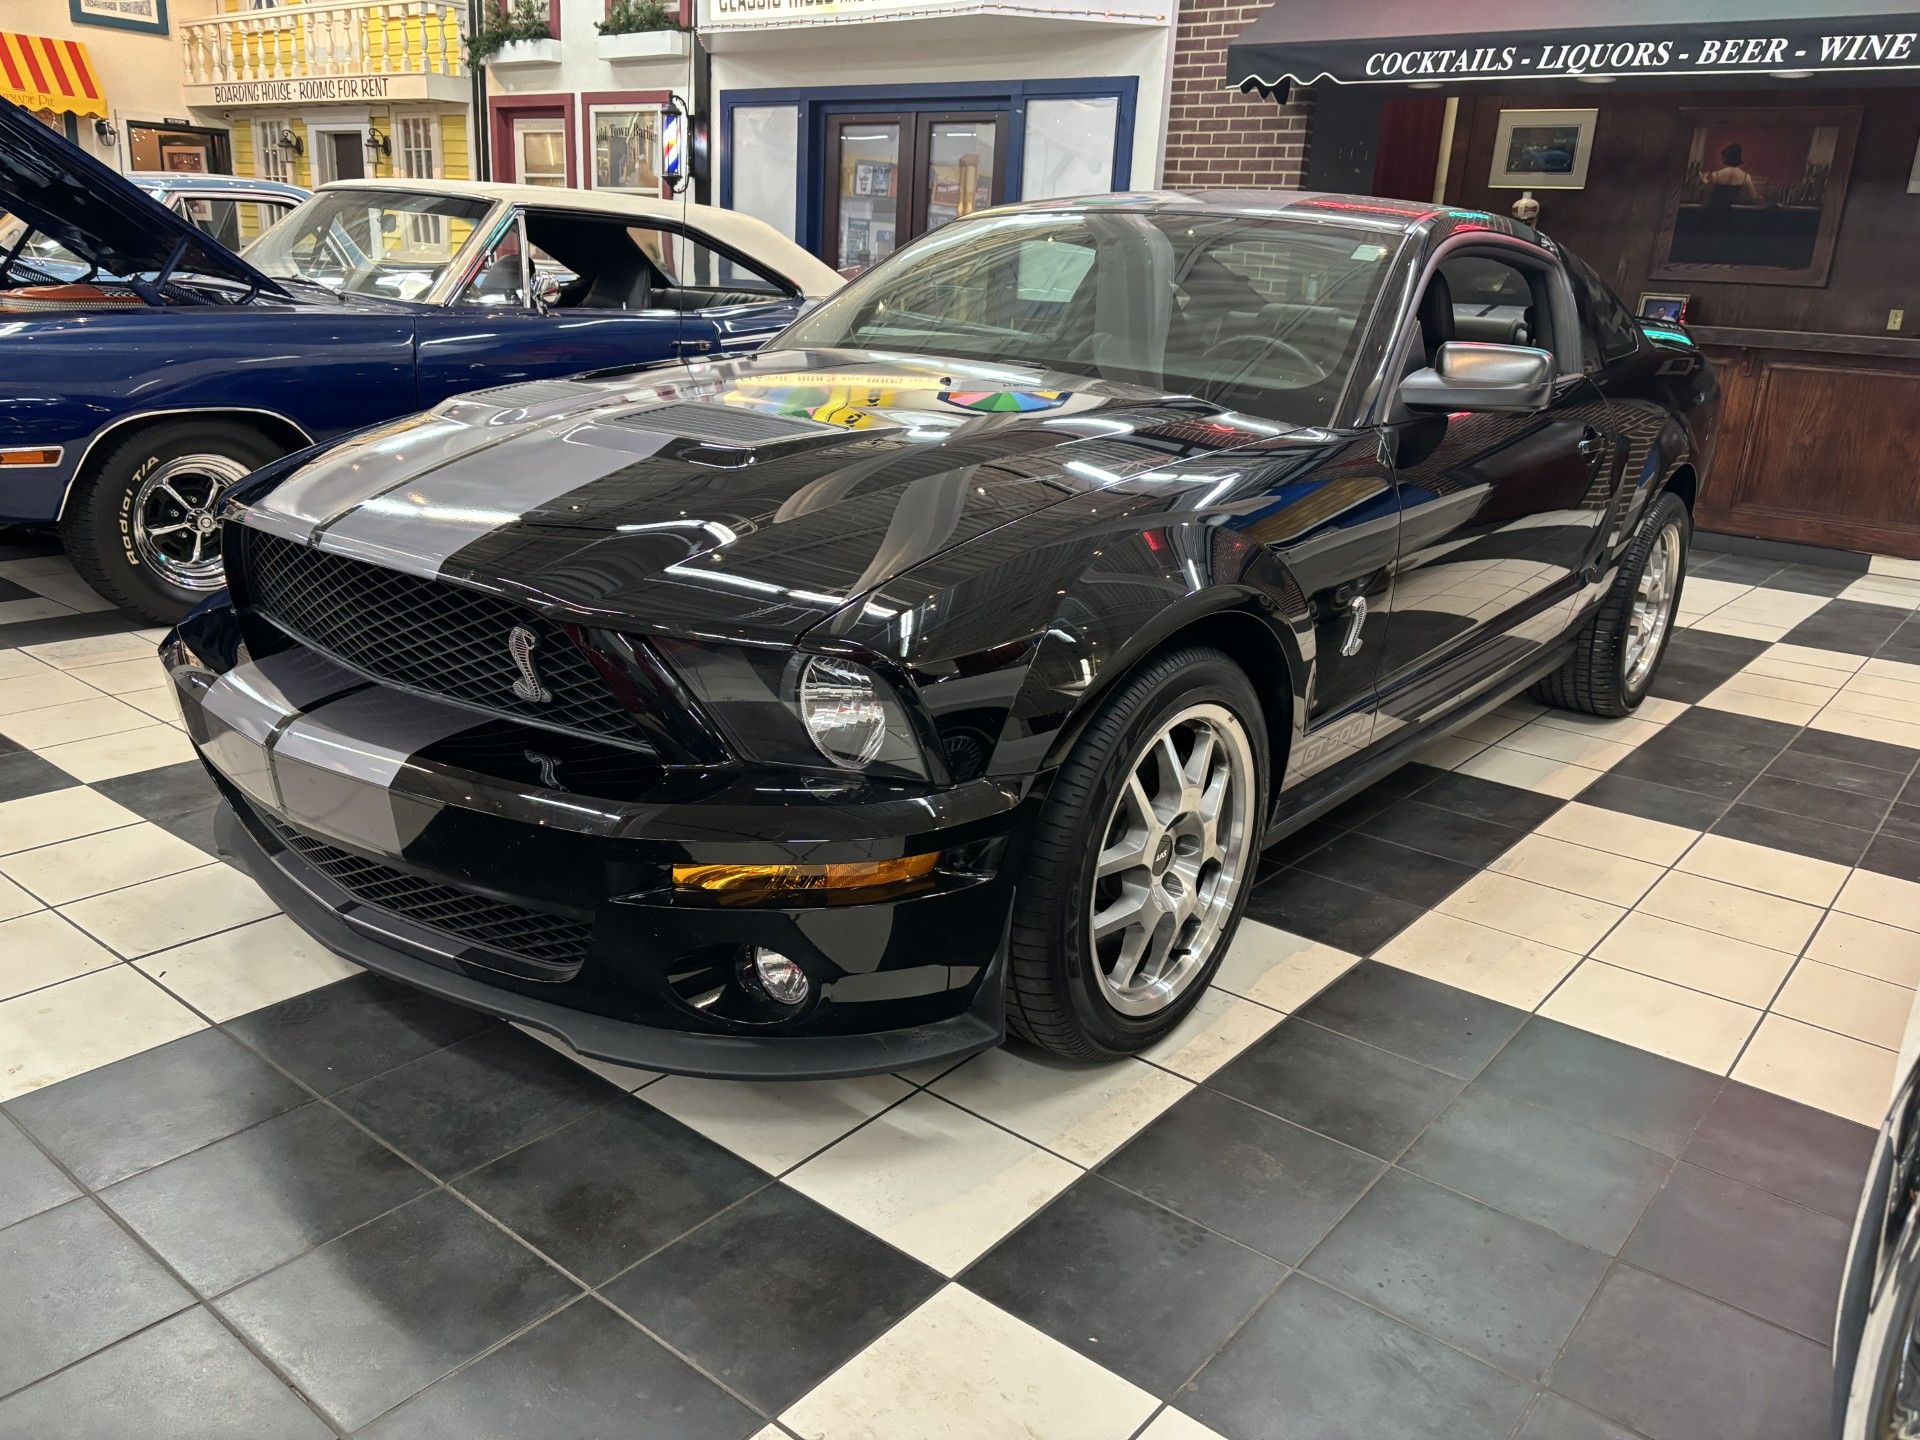 2007 Mustang Shelby Image